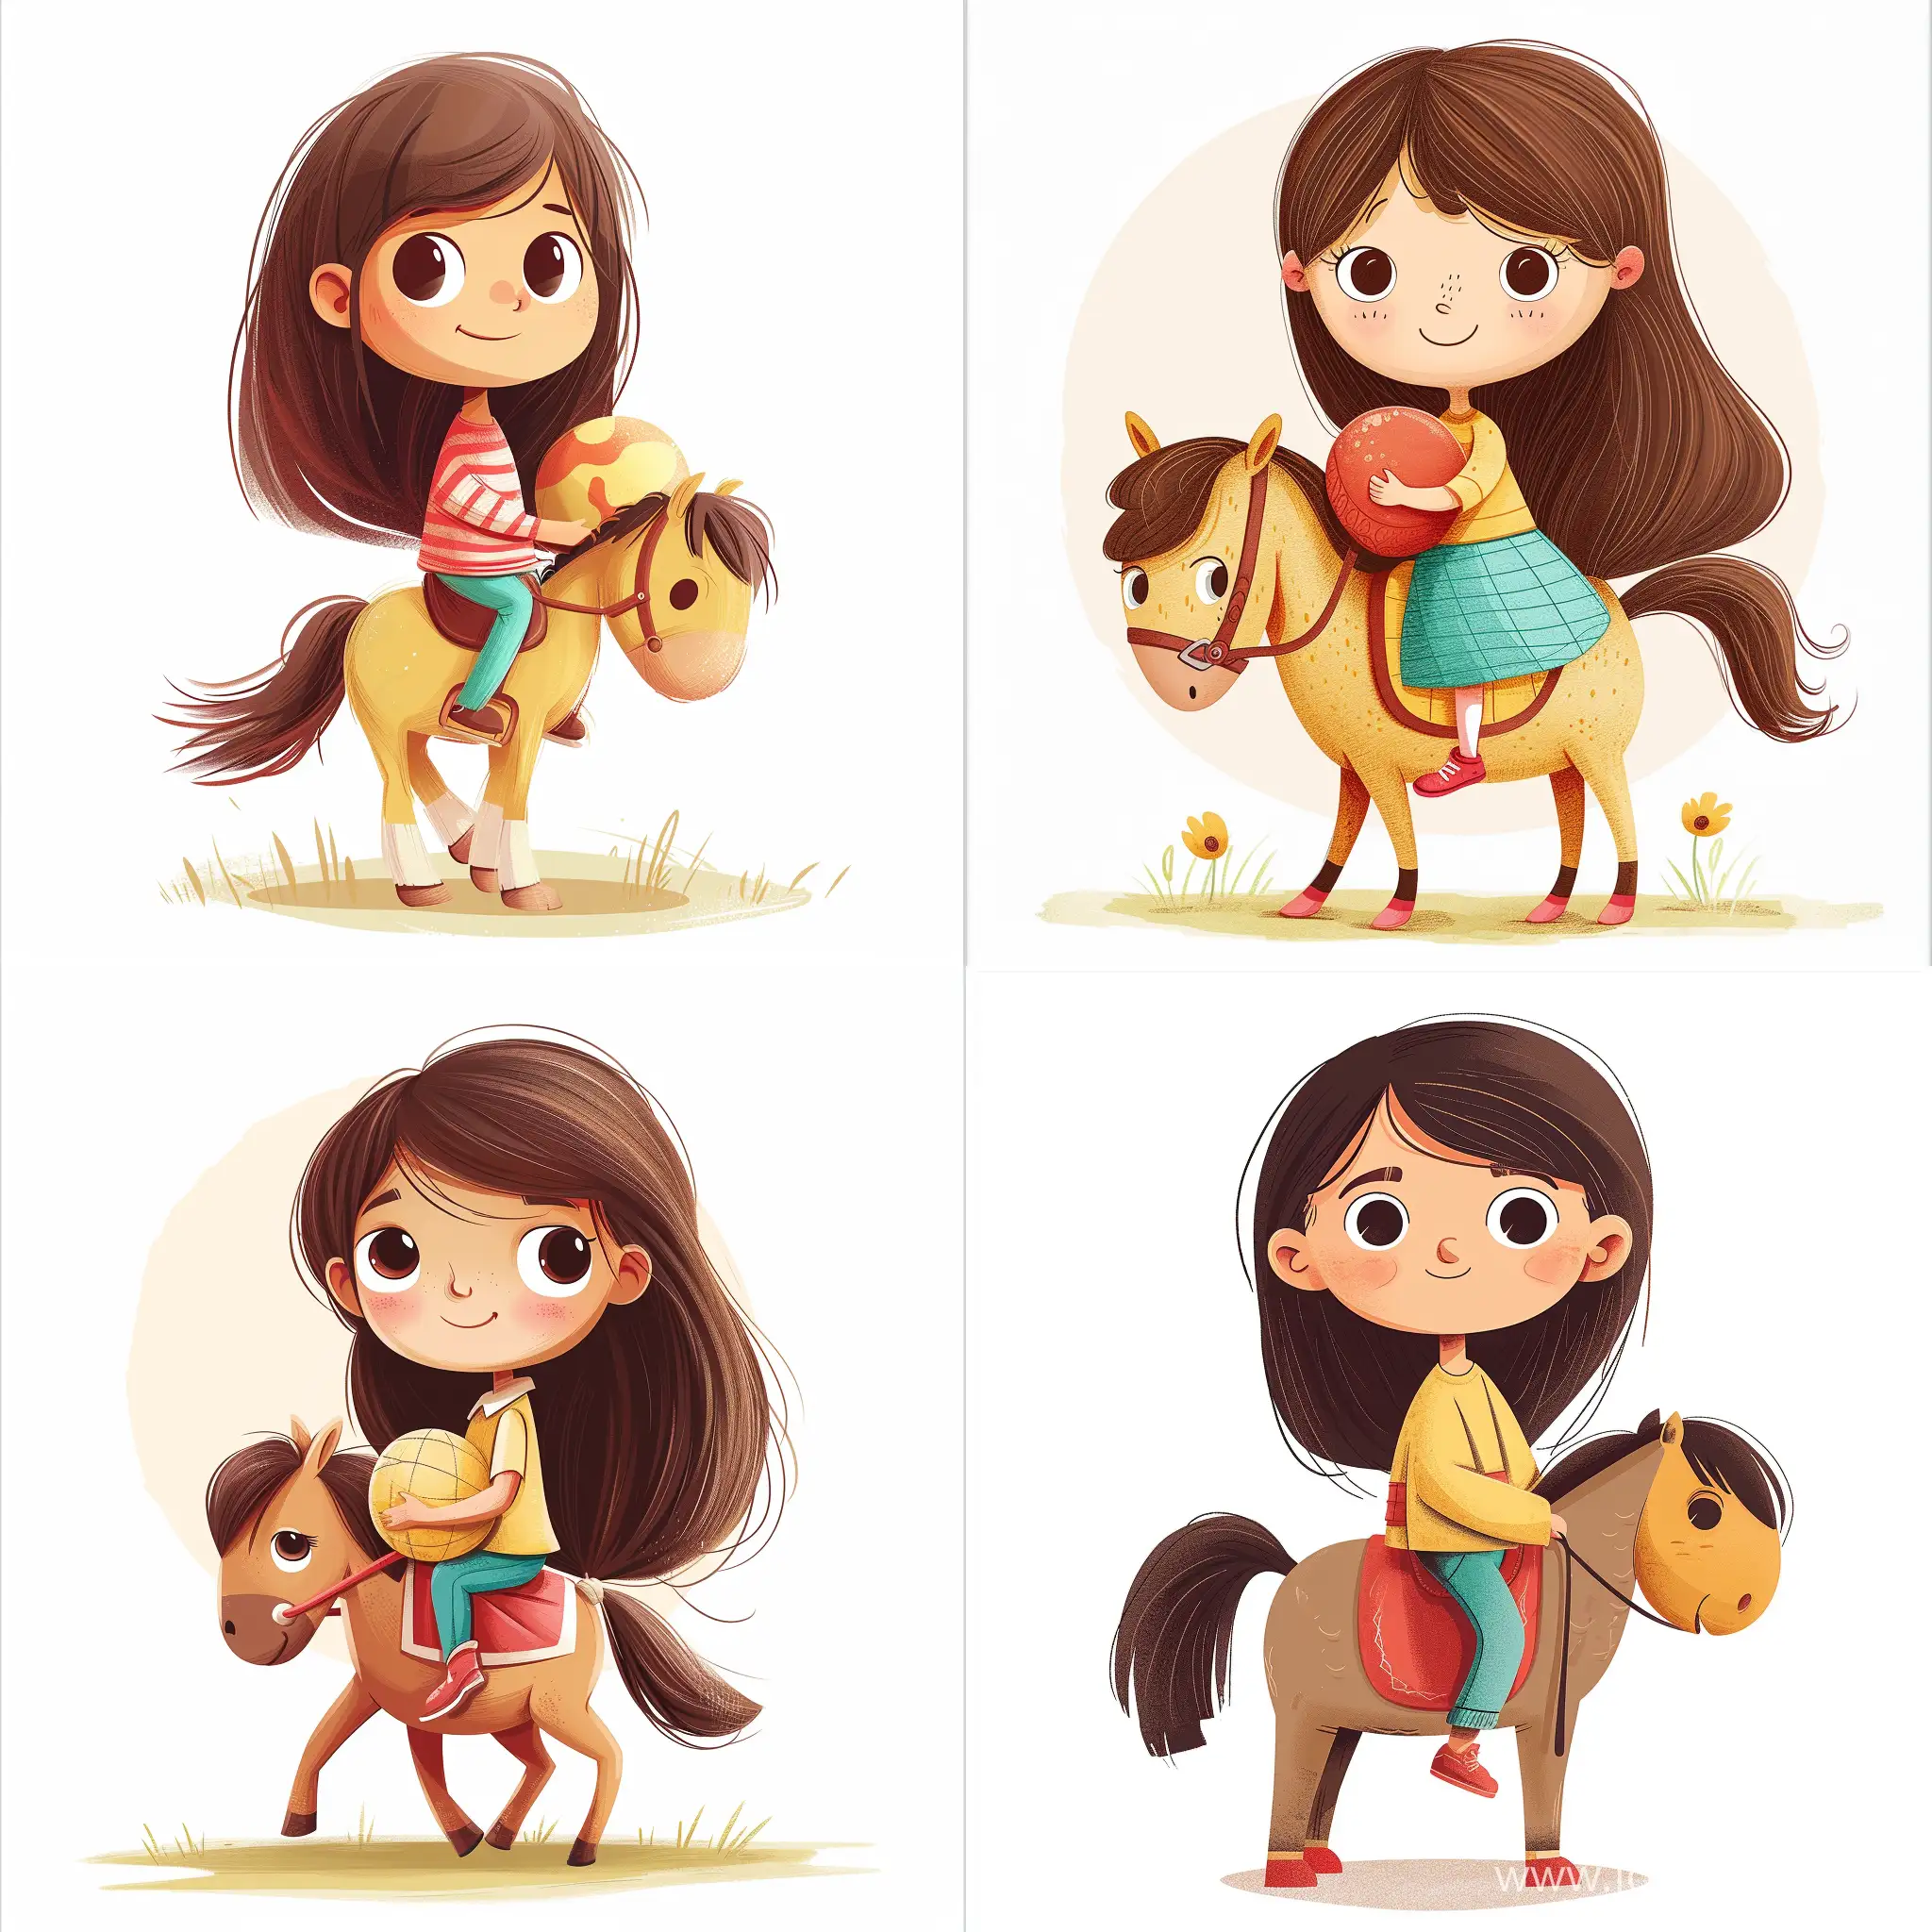 Adorable-Childrens-Book-Illustration-Cute-Girl-Riding-a-Horse